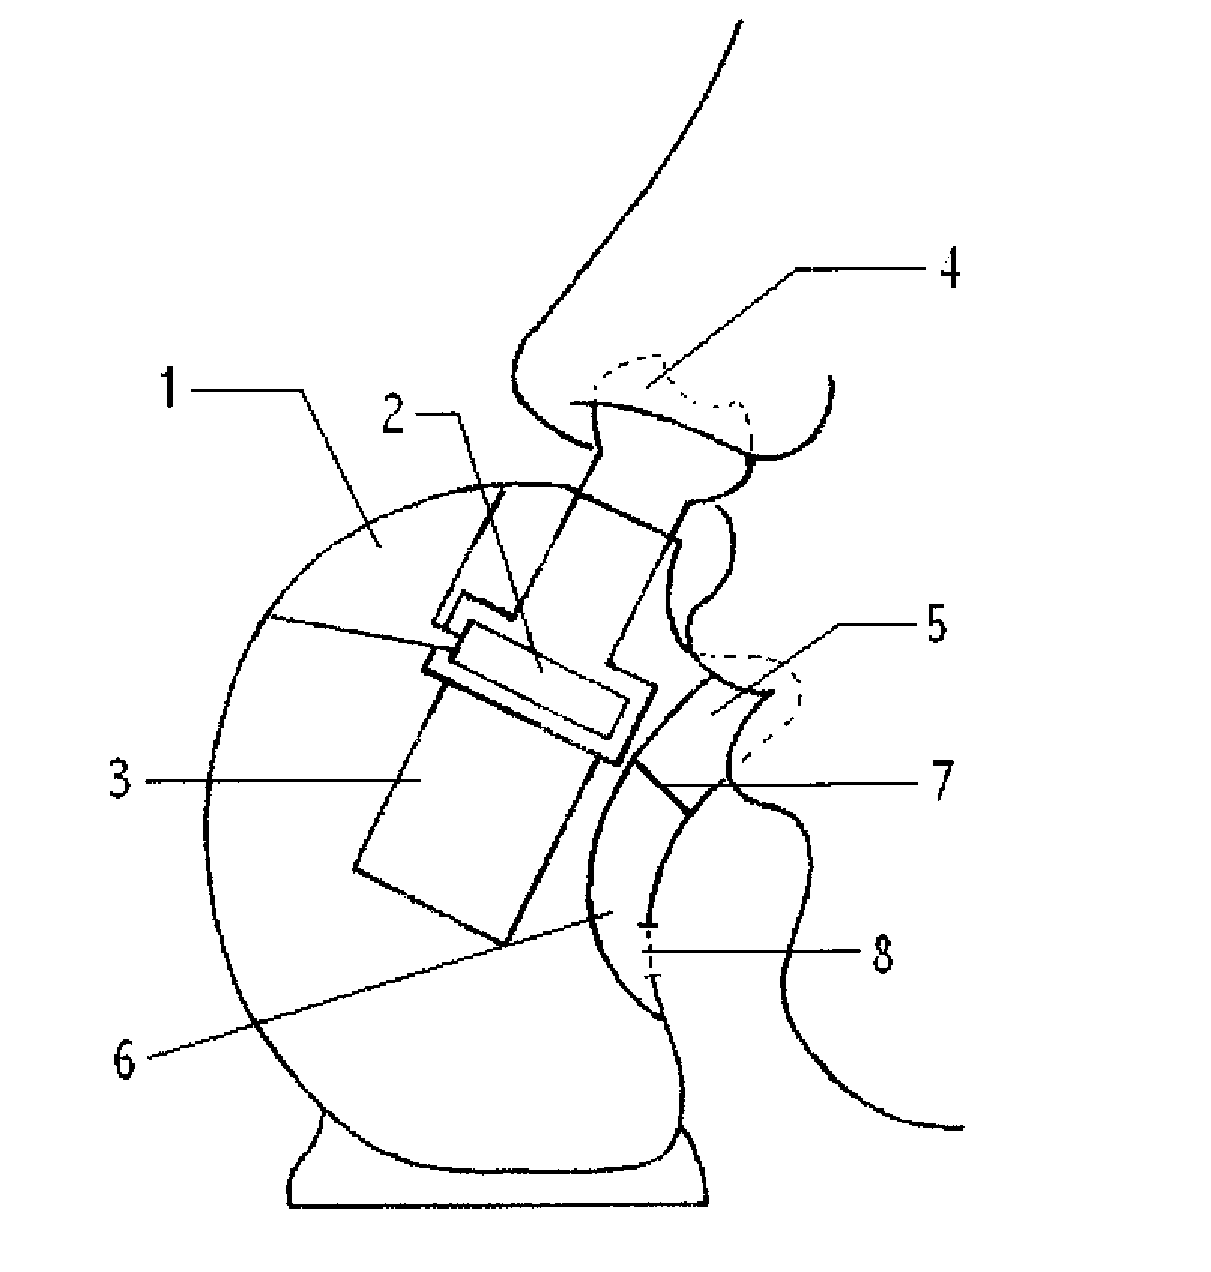 Aerosol therapy device with high frequency delivery